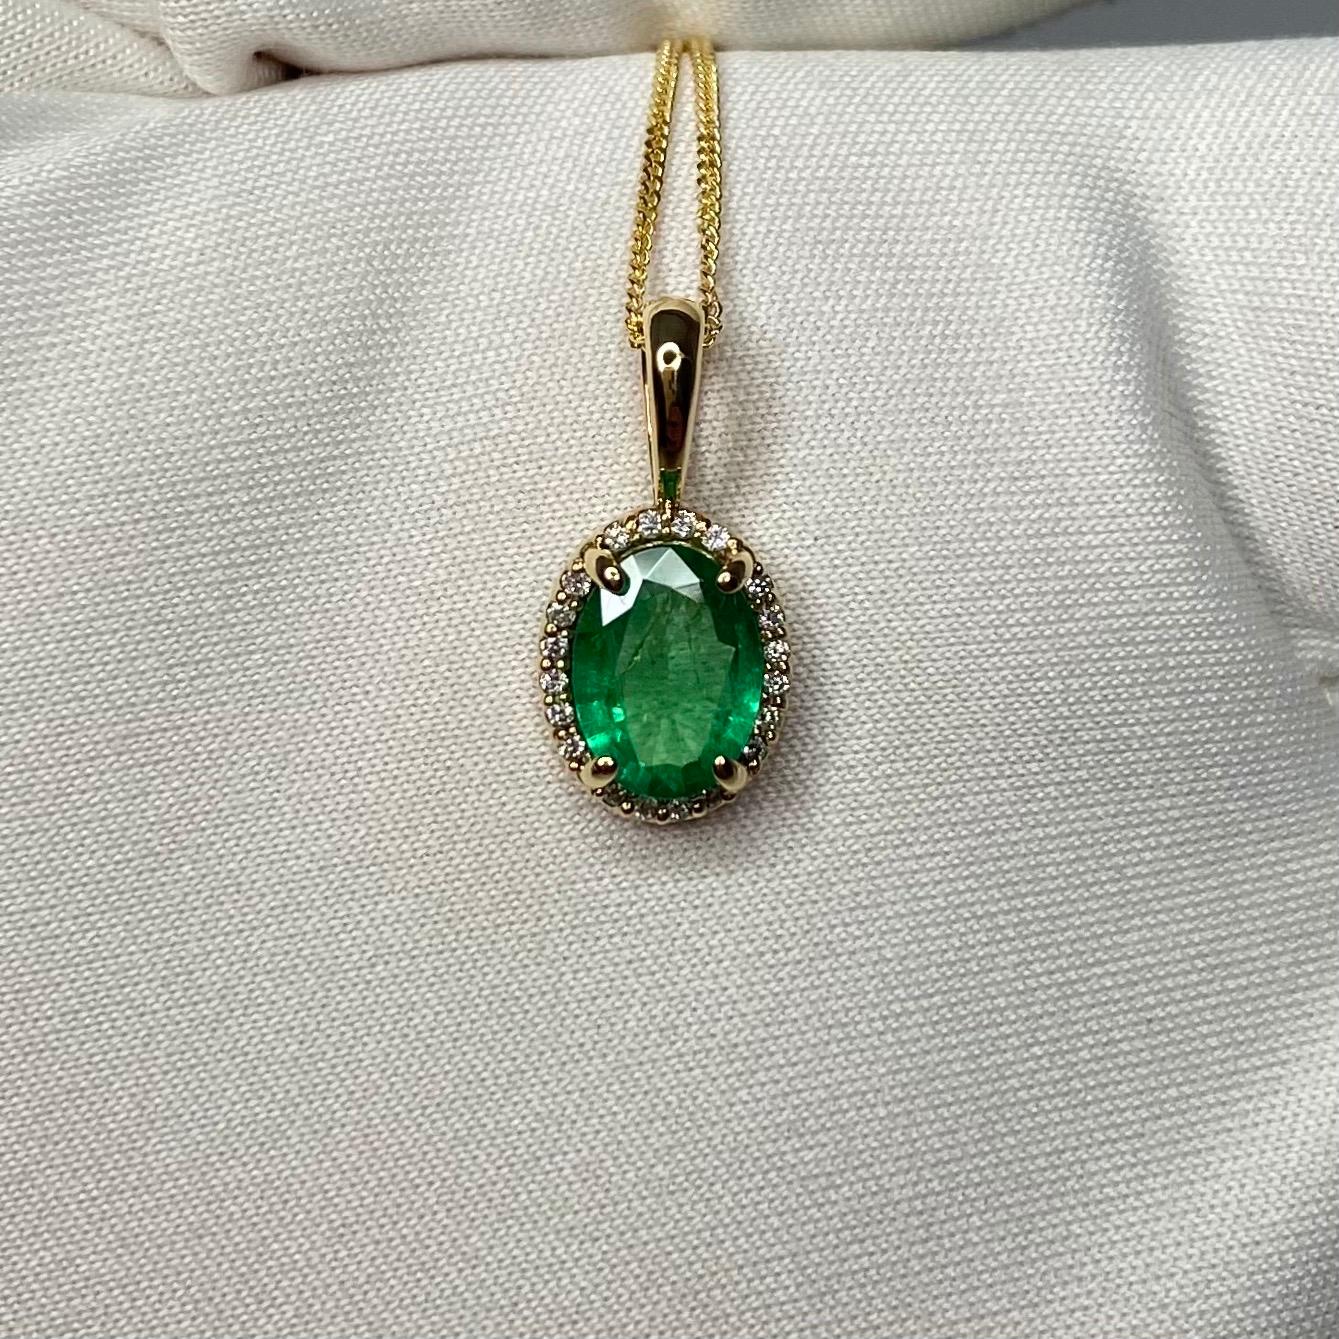 Bright Green Emerald & Diamond 18k Yellow Gold Pendant.

1.00 Carat emerald with a beautiful bright green colour and very good clarity. Some small natural inclusions visible when looking closely (as expected with emeralds) but still a clean stone.